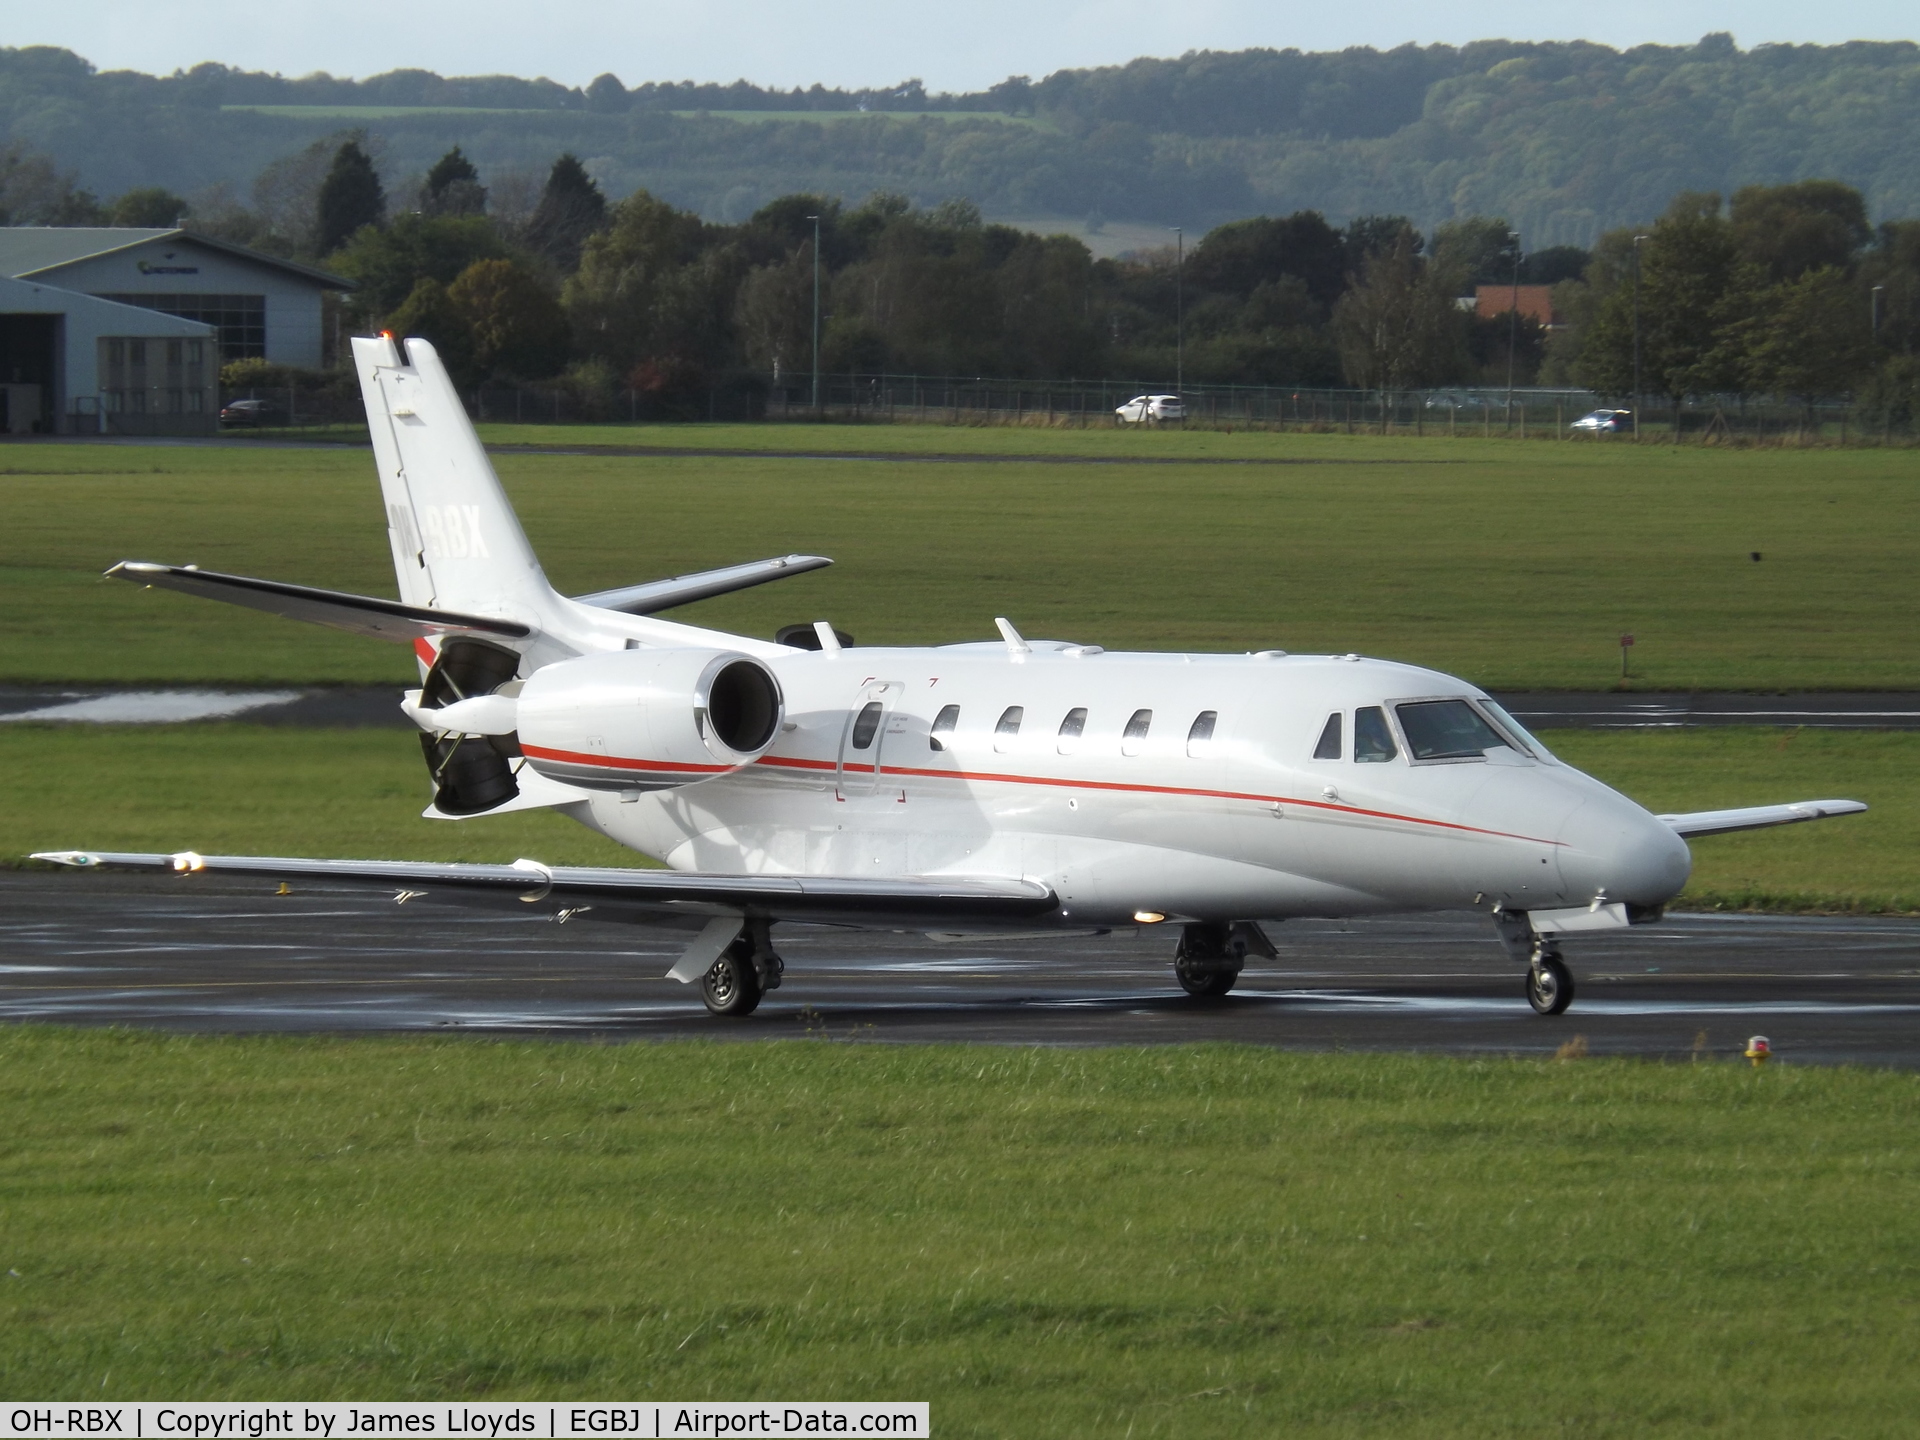 OH-RBX, 1999 Cessna 560XL Citation Excel C/N 560-5056, Back tracking RW 27 at Gloucestershire Airport.